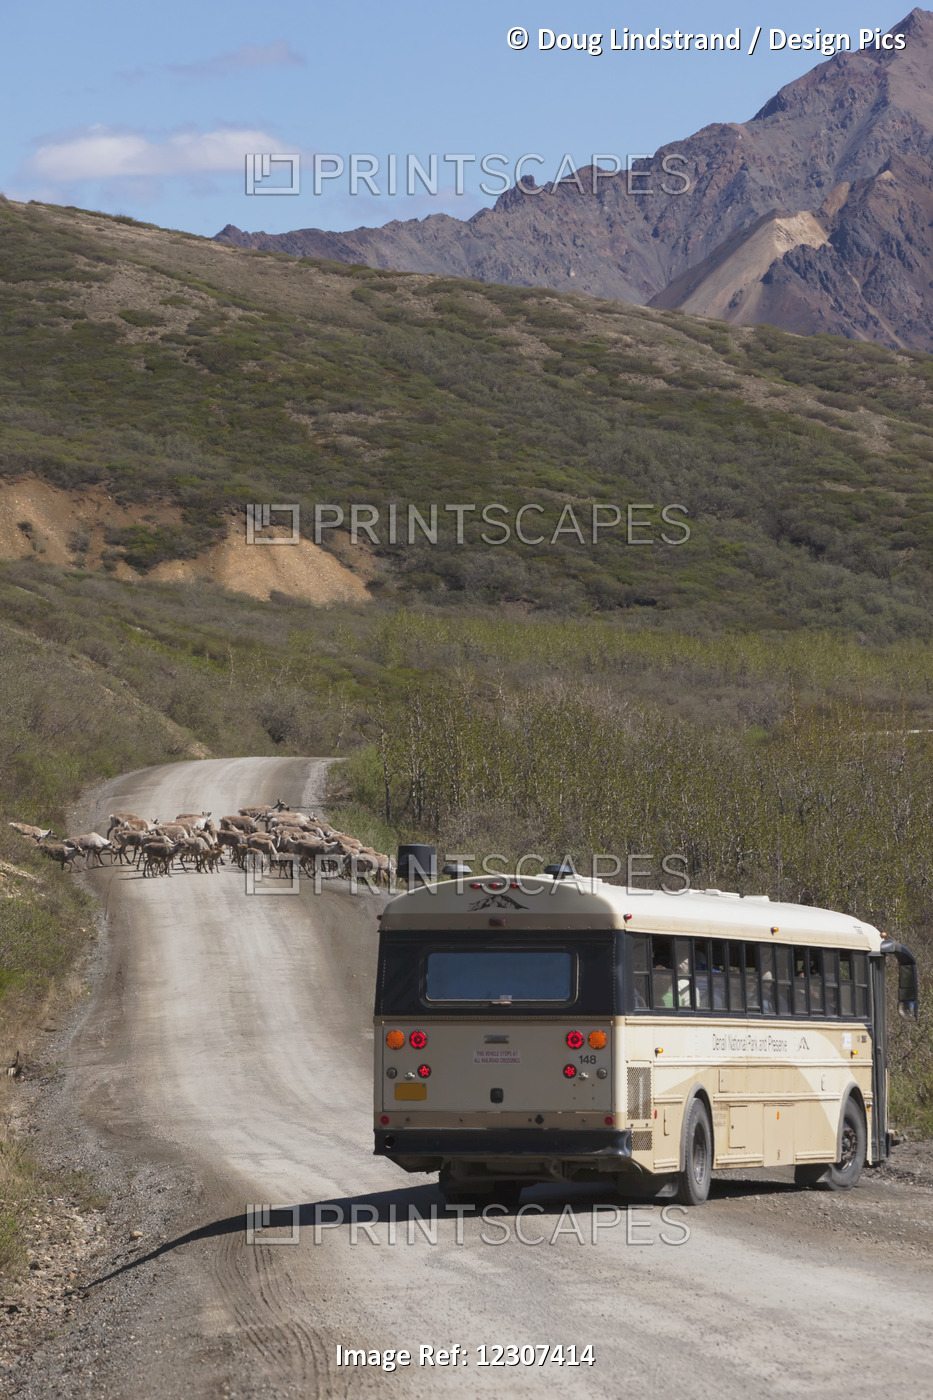 A Tour Bus Turns Sideways On The Park Road To Watch A Herd Of Caribou Cross In ...